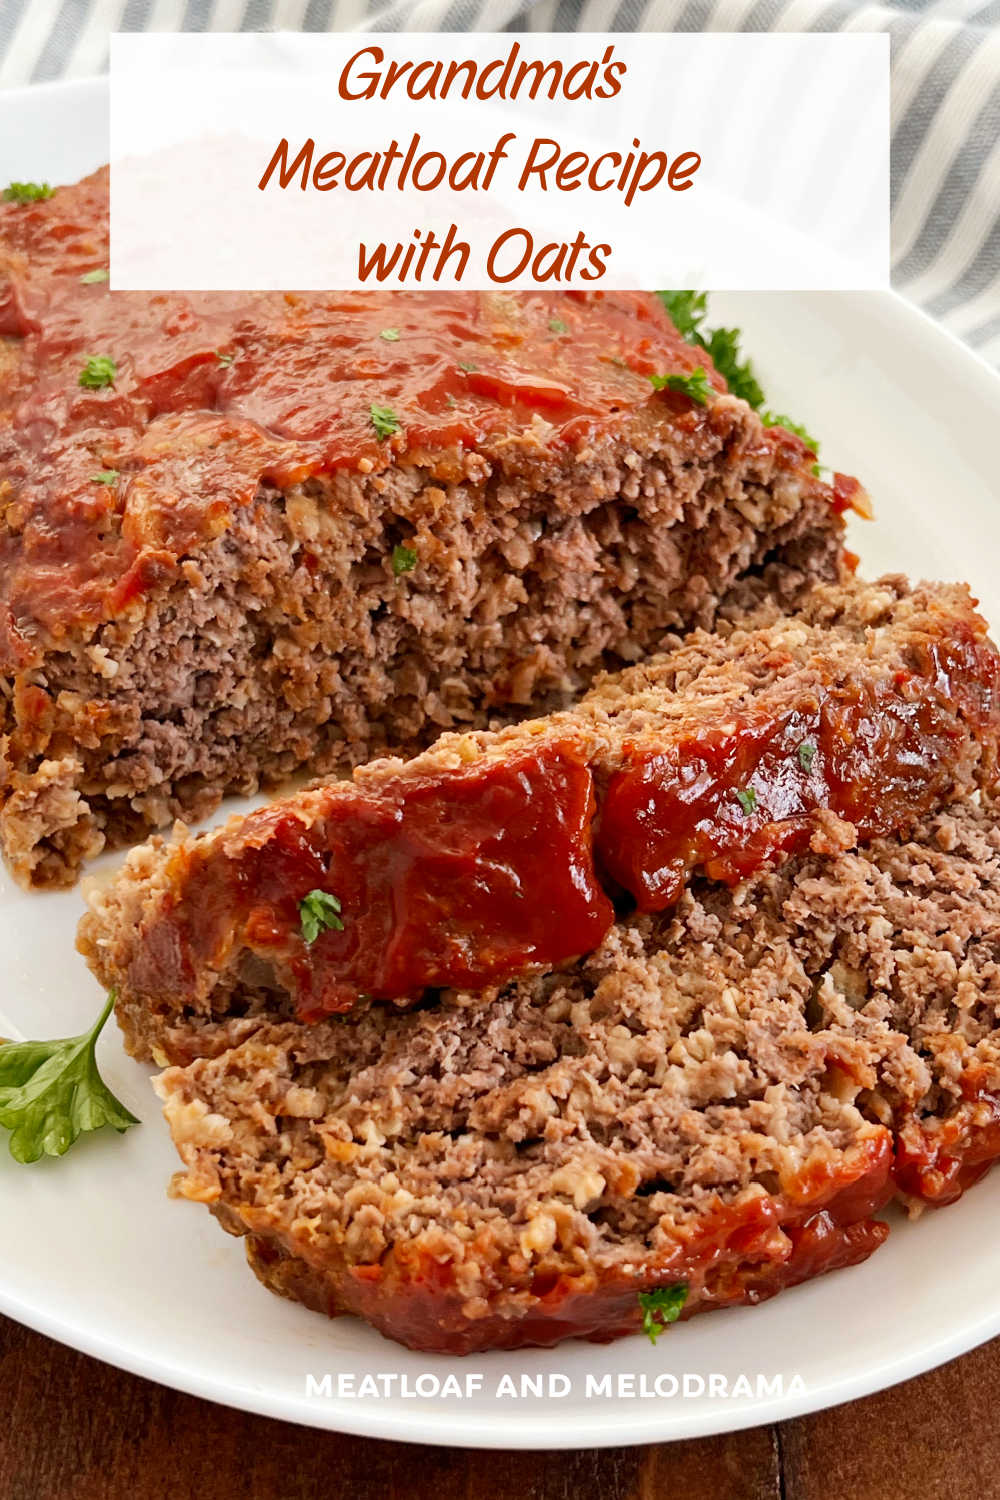 Grandma's Quaker Oats Meatloaf is a classic meatloaf recipe with oatmeal instead of bread crumbs and other simple ingredients. Easy comfort food and a delicious dinner the whole family will love! via @meamel